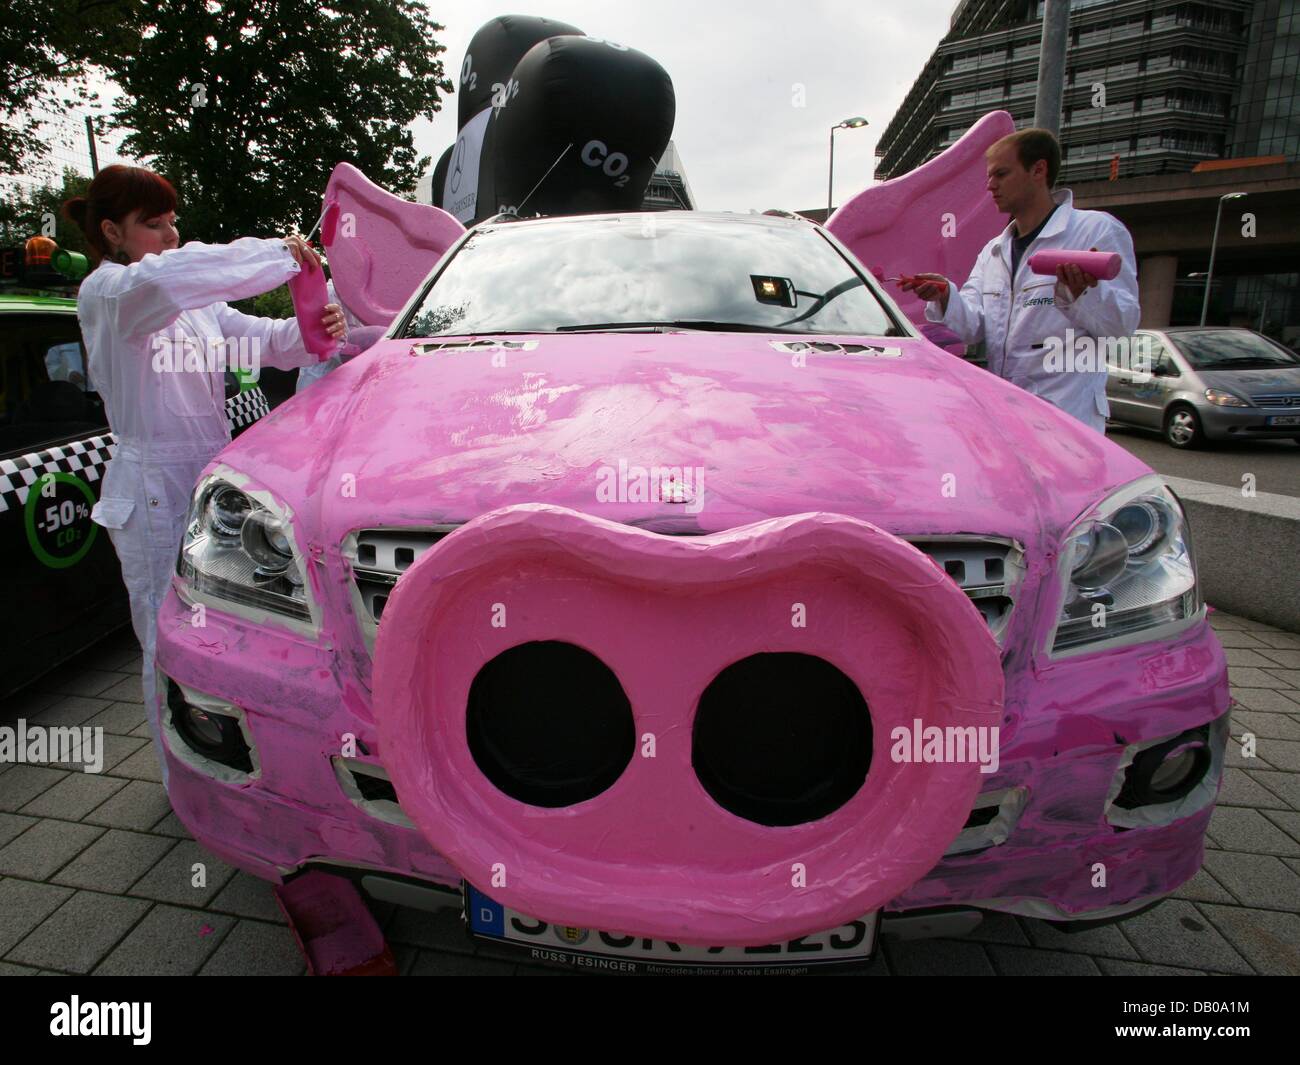 Members of environmental protection organisation 'Greenpeace' prepare a protest campaign against climate-damaging policies of automobile manufacturer DaimlerChrysler in front of the Mercedes-Benz museum in Stuttgart, Germany, 25 July 2007. For this purpose the campaigners paint two Mercedes cars in pink and decorate them with snouts and ears to symbolise pigs. Giant balloons stand  Stock Photo